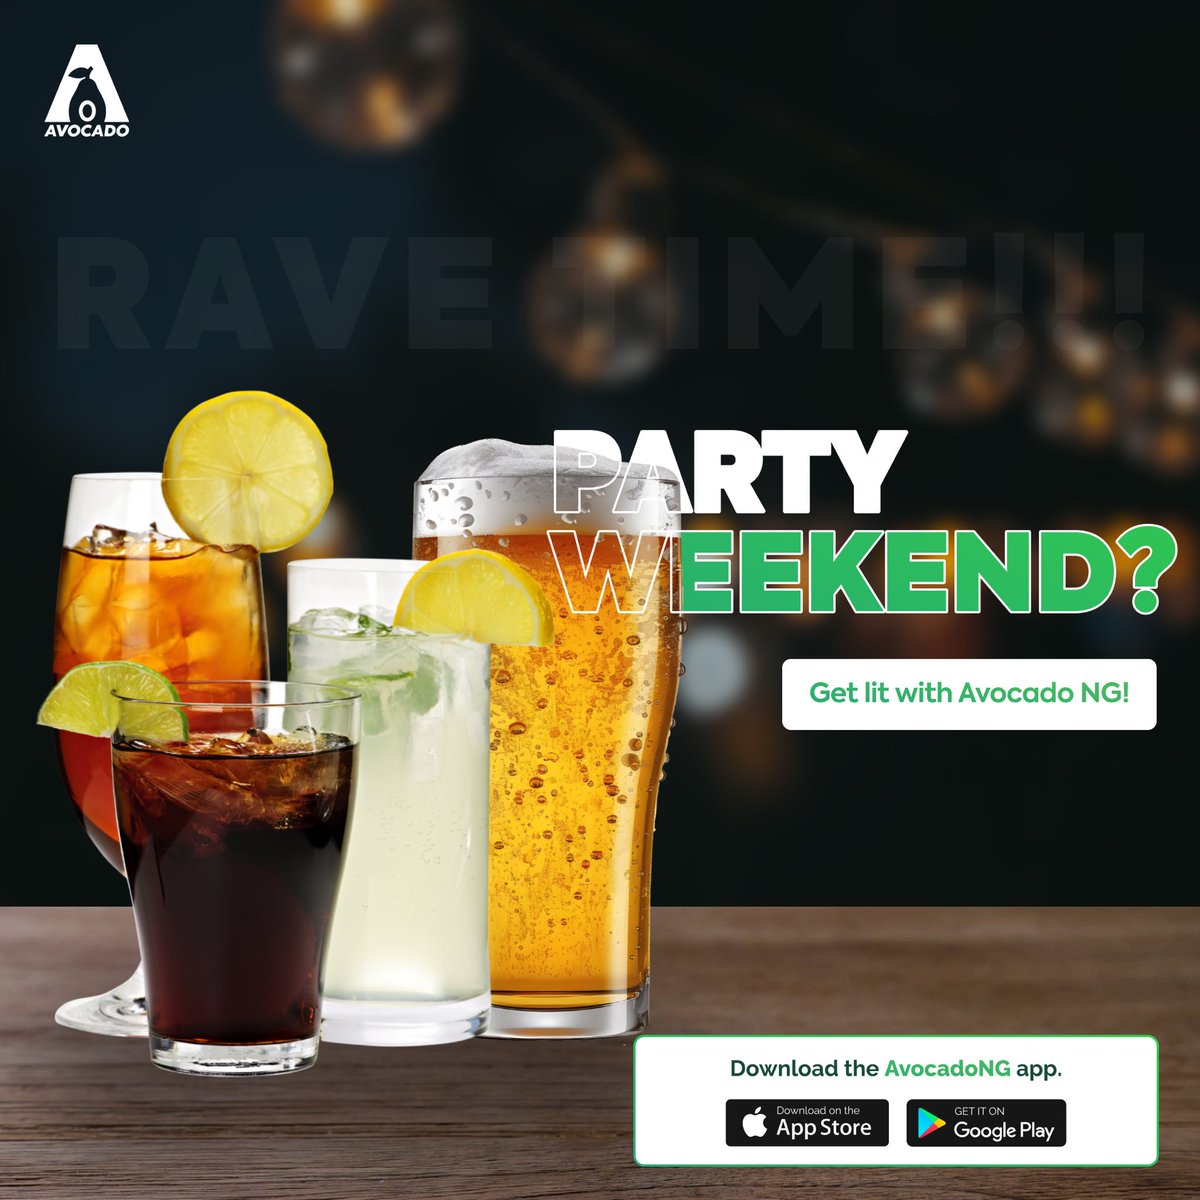 Weekends are for faaji so come get all your drinks from @avocado_ng 

#AvocadoNG #avocado_ng #ordernow #delivery #akure #drinks #weekendvibes #party